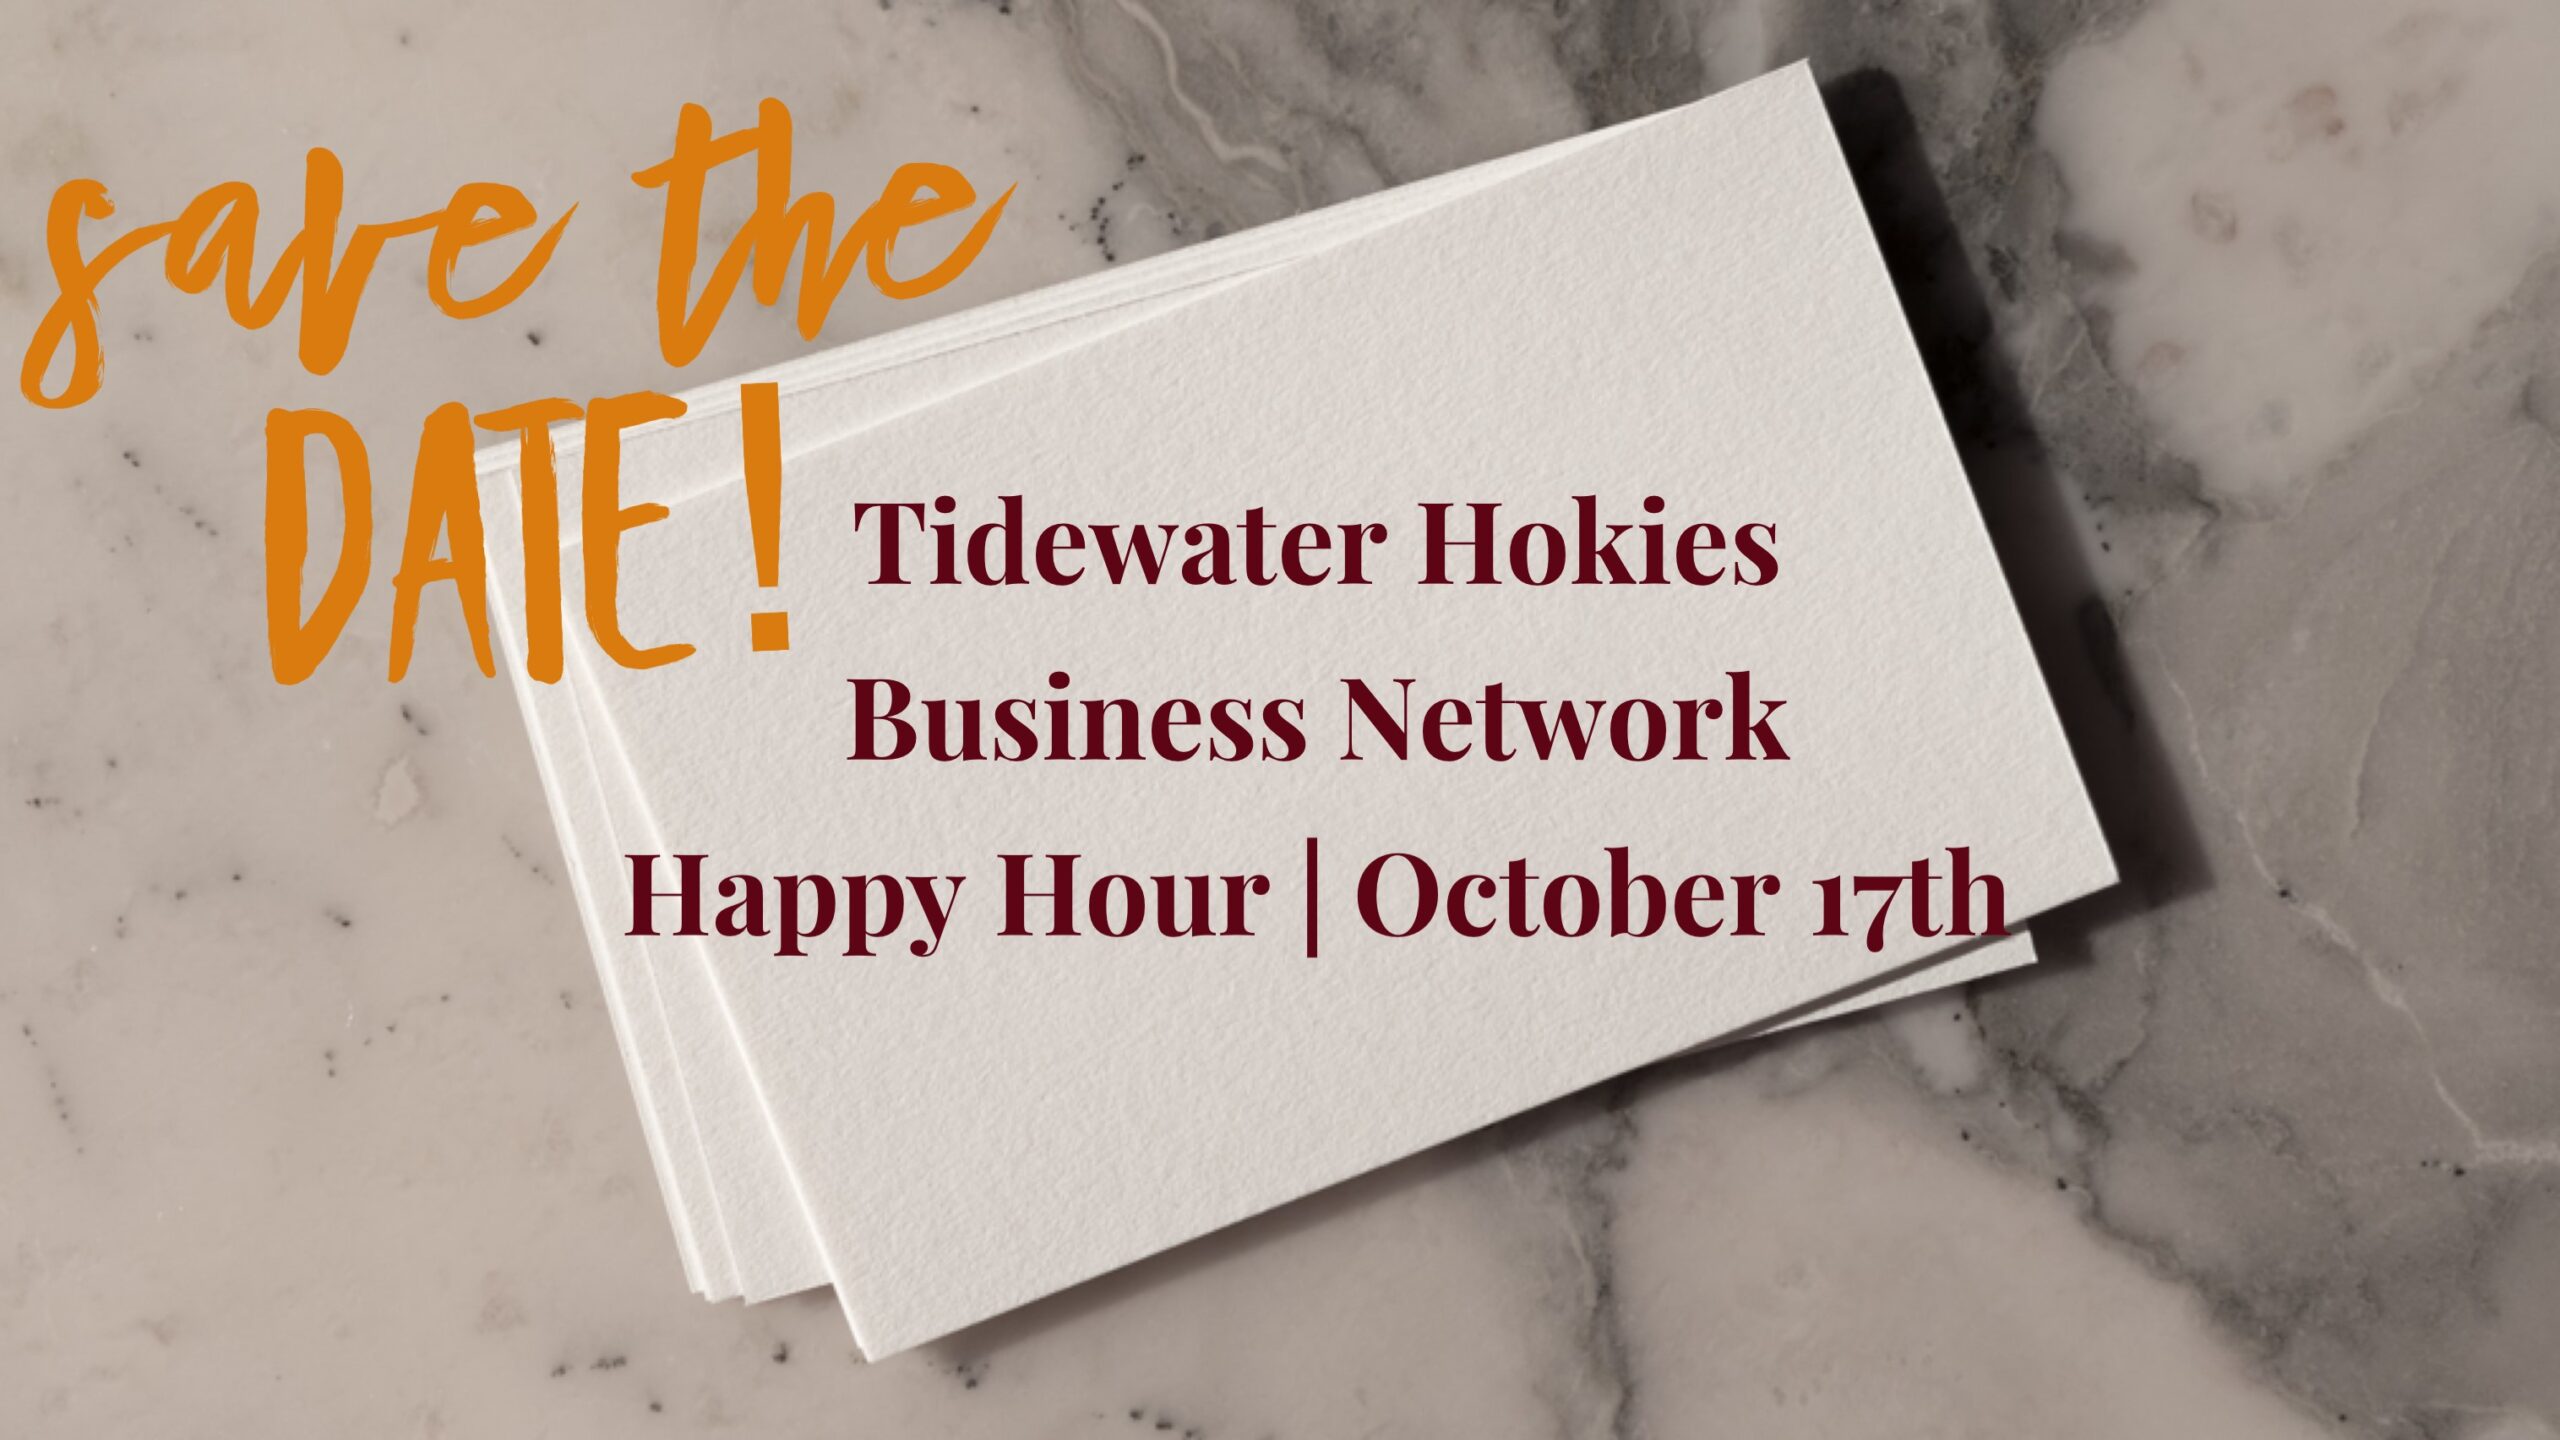 Save the Date: Tidewater Hokies Business Network Happy Hour